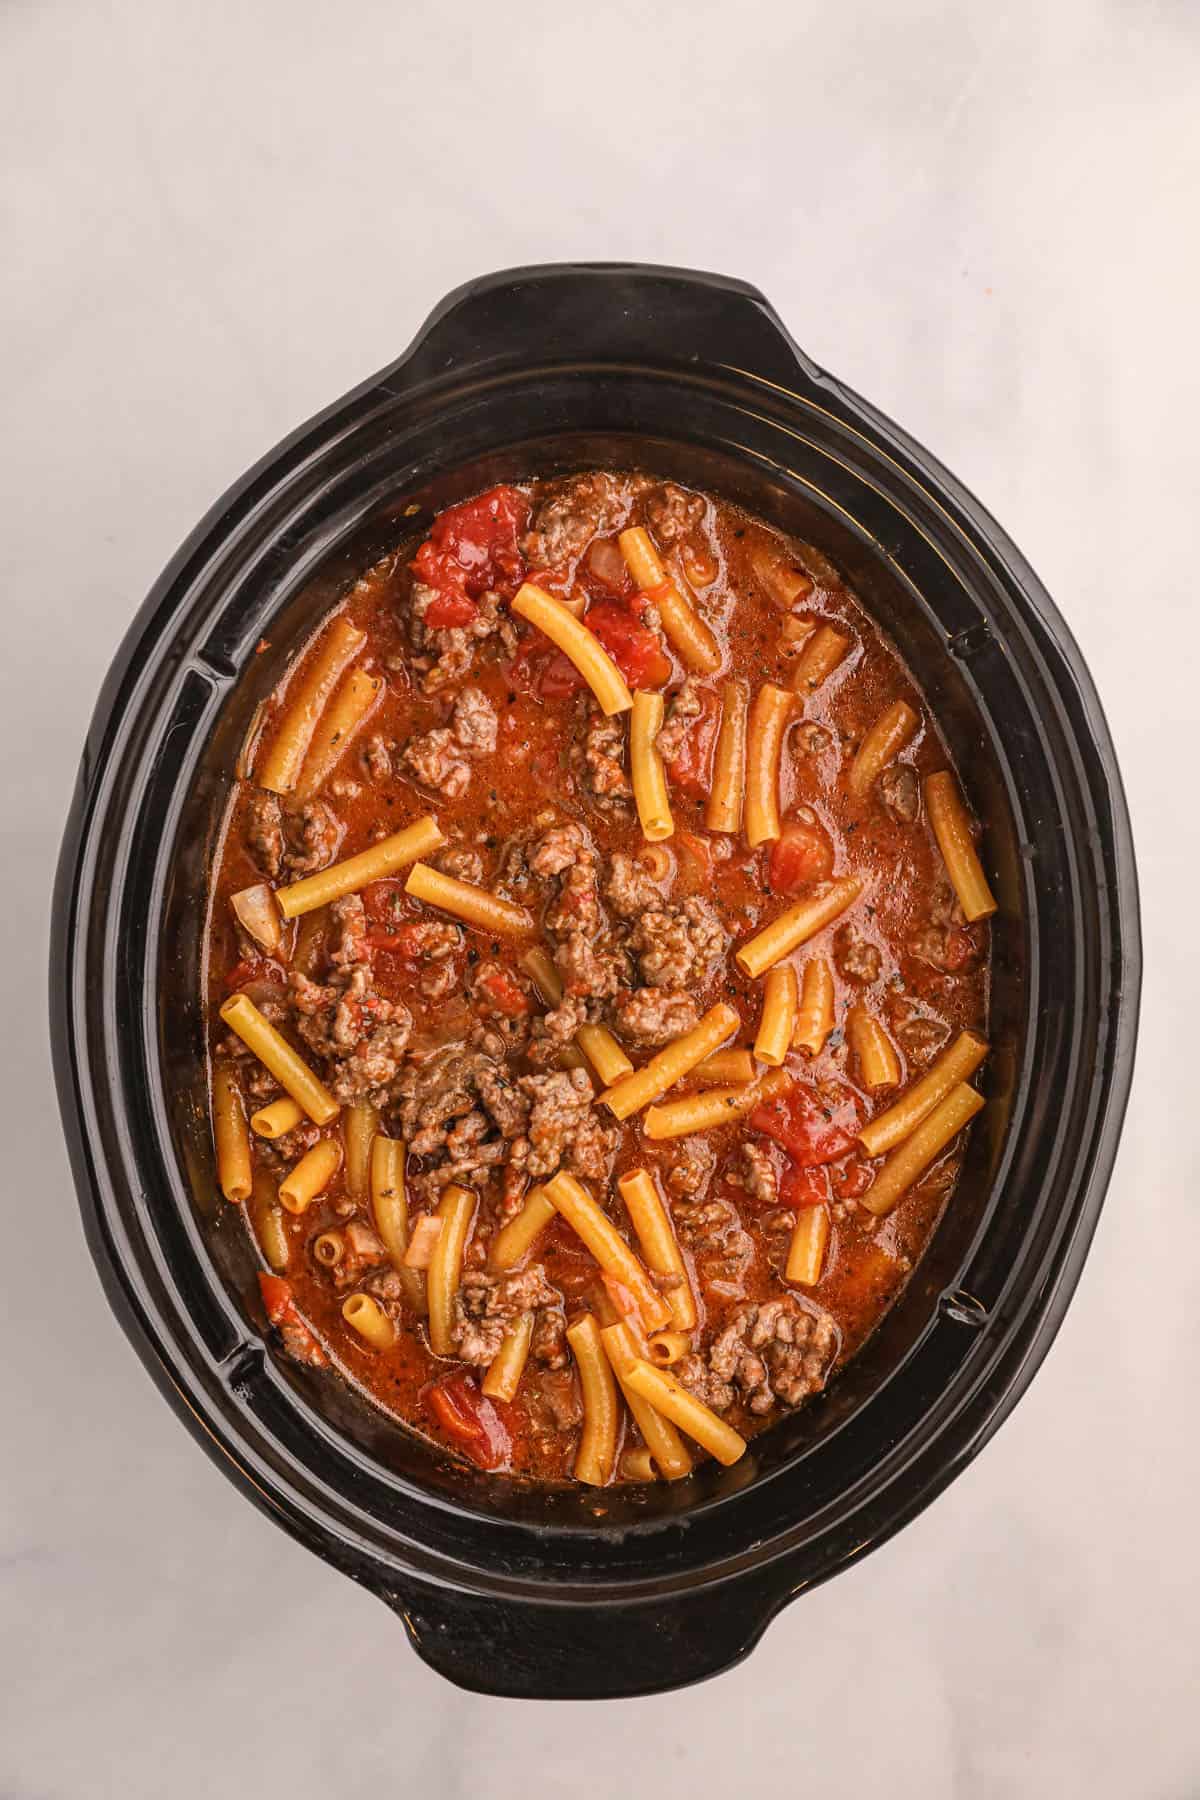 Adding uncooked ziti noodles to the crockpot with browned meat anad tomato sauce.